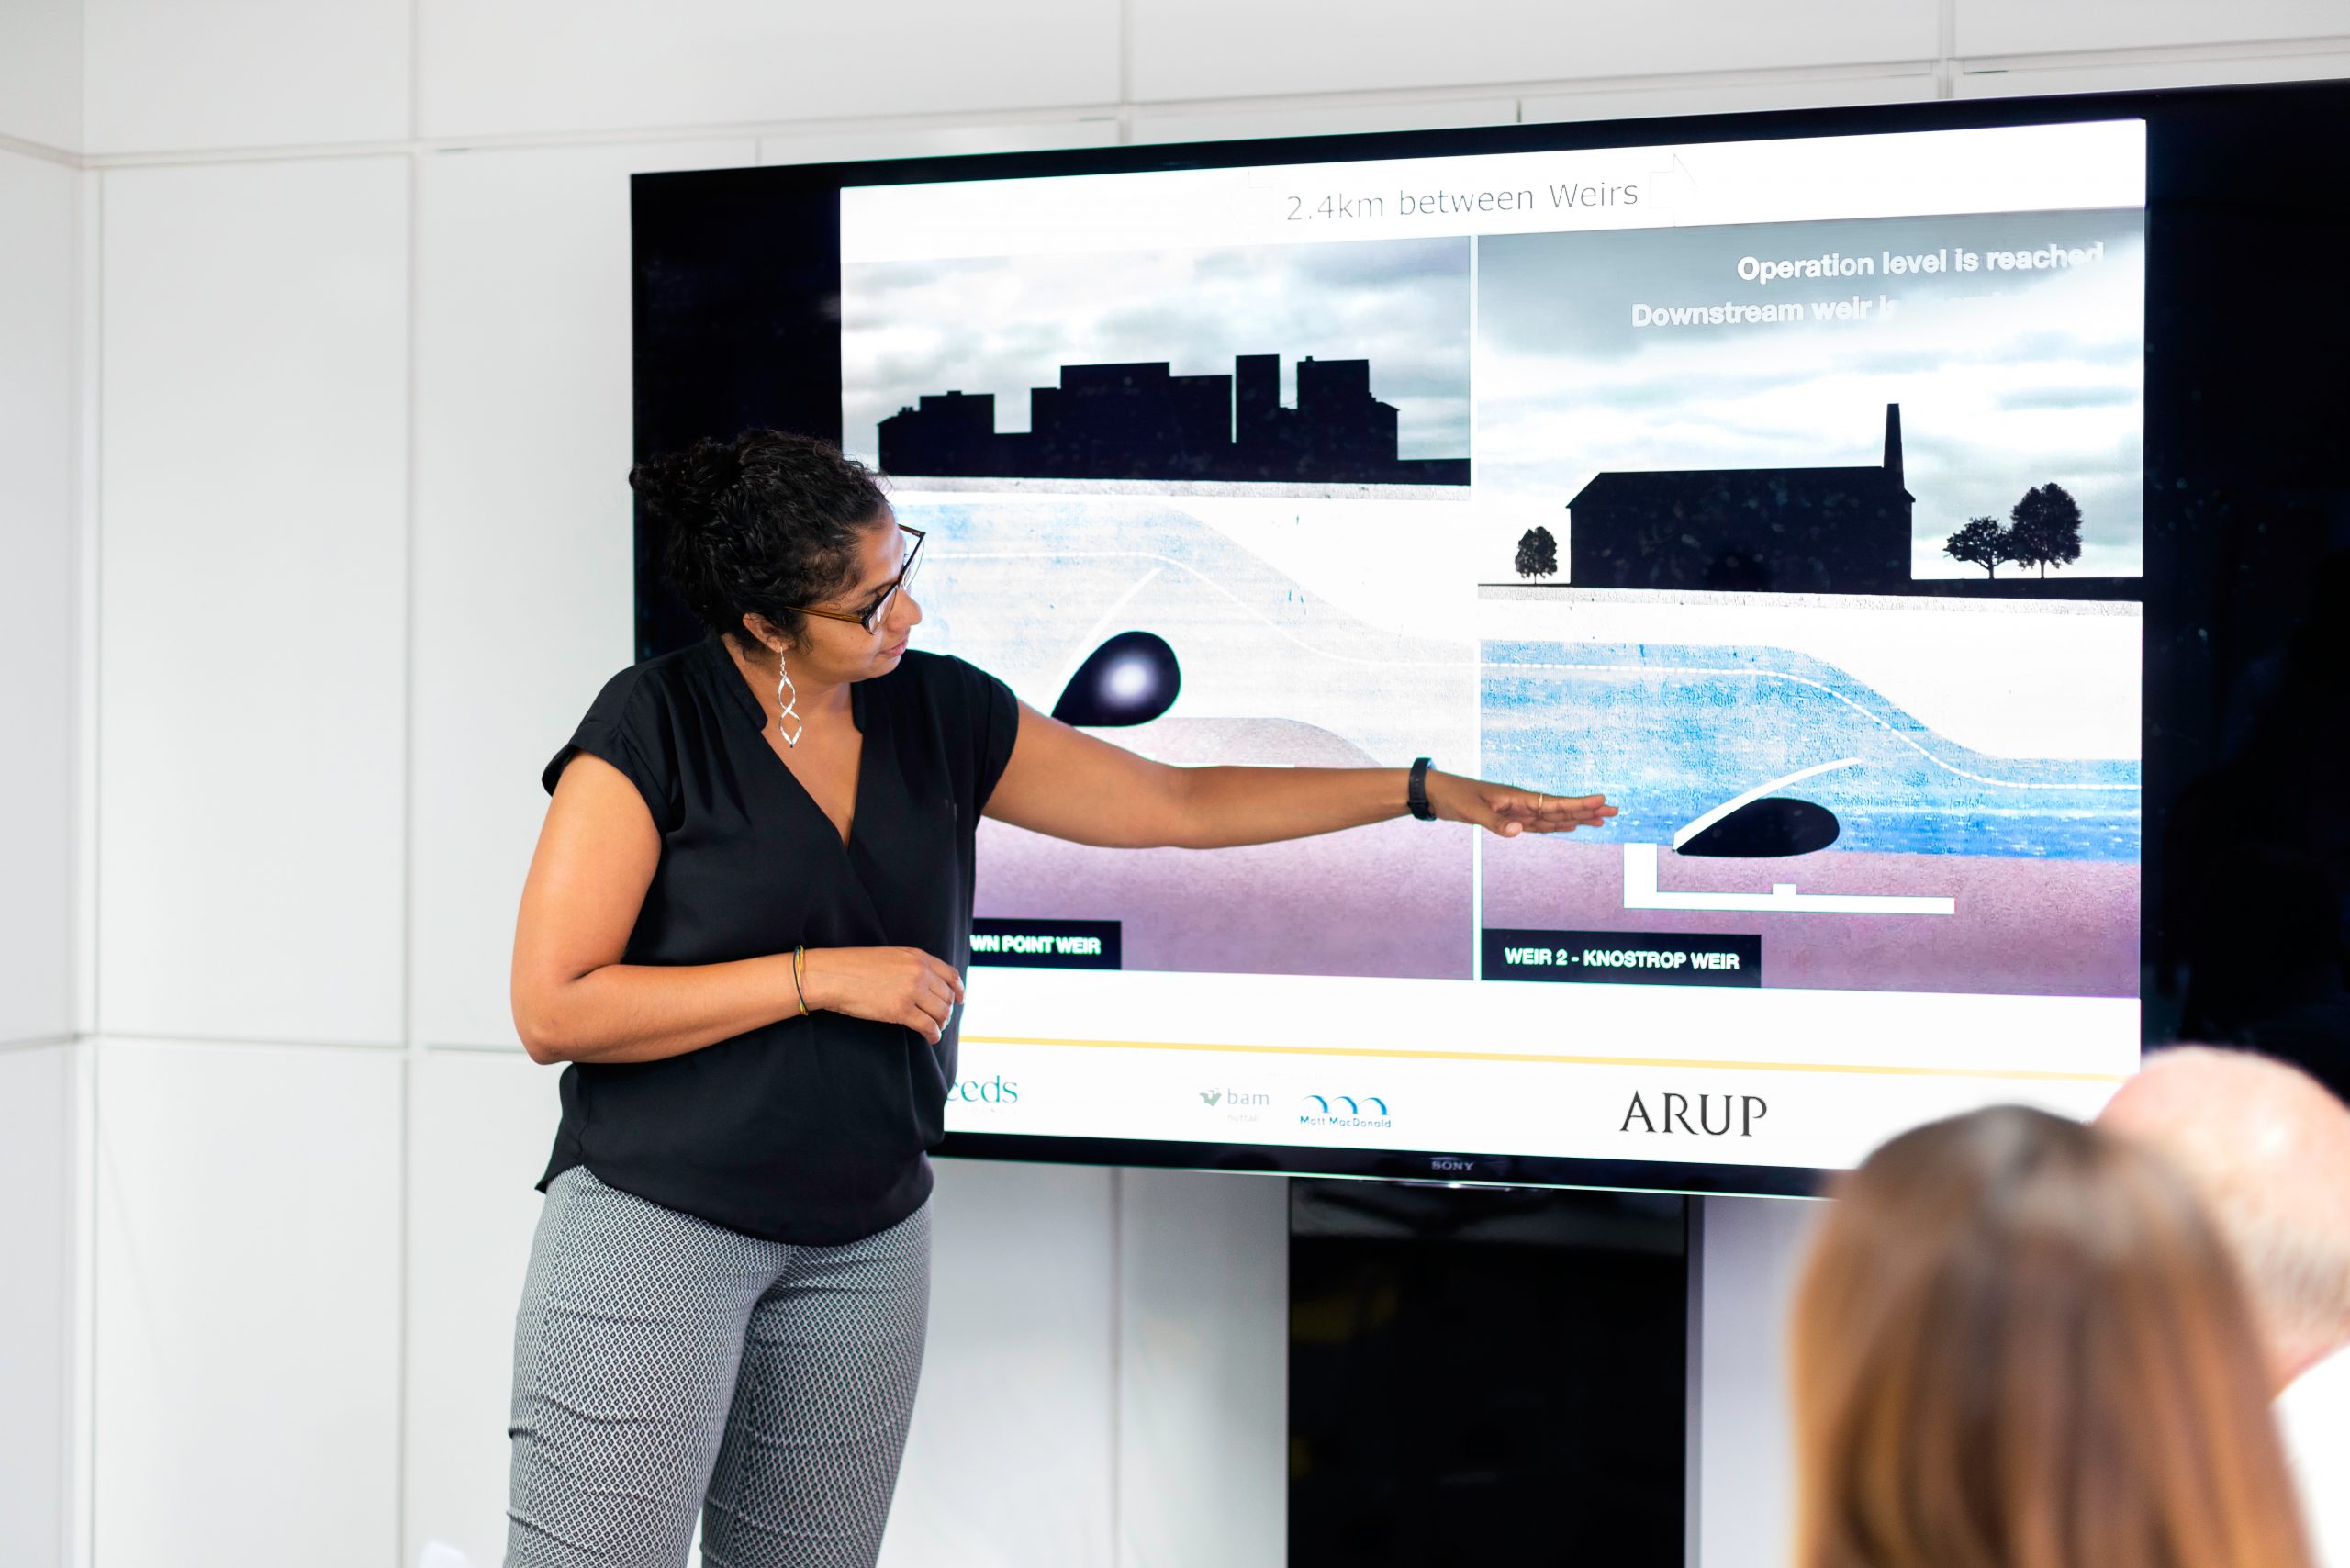 Woman presenting a Powerpoint presentation